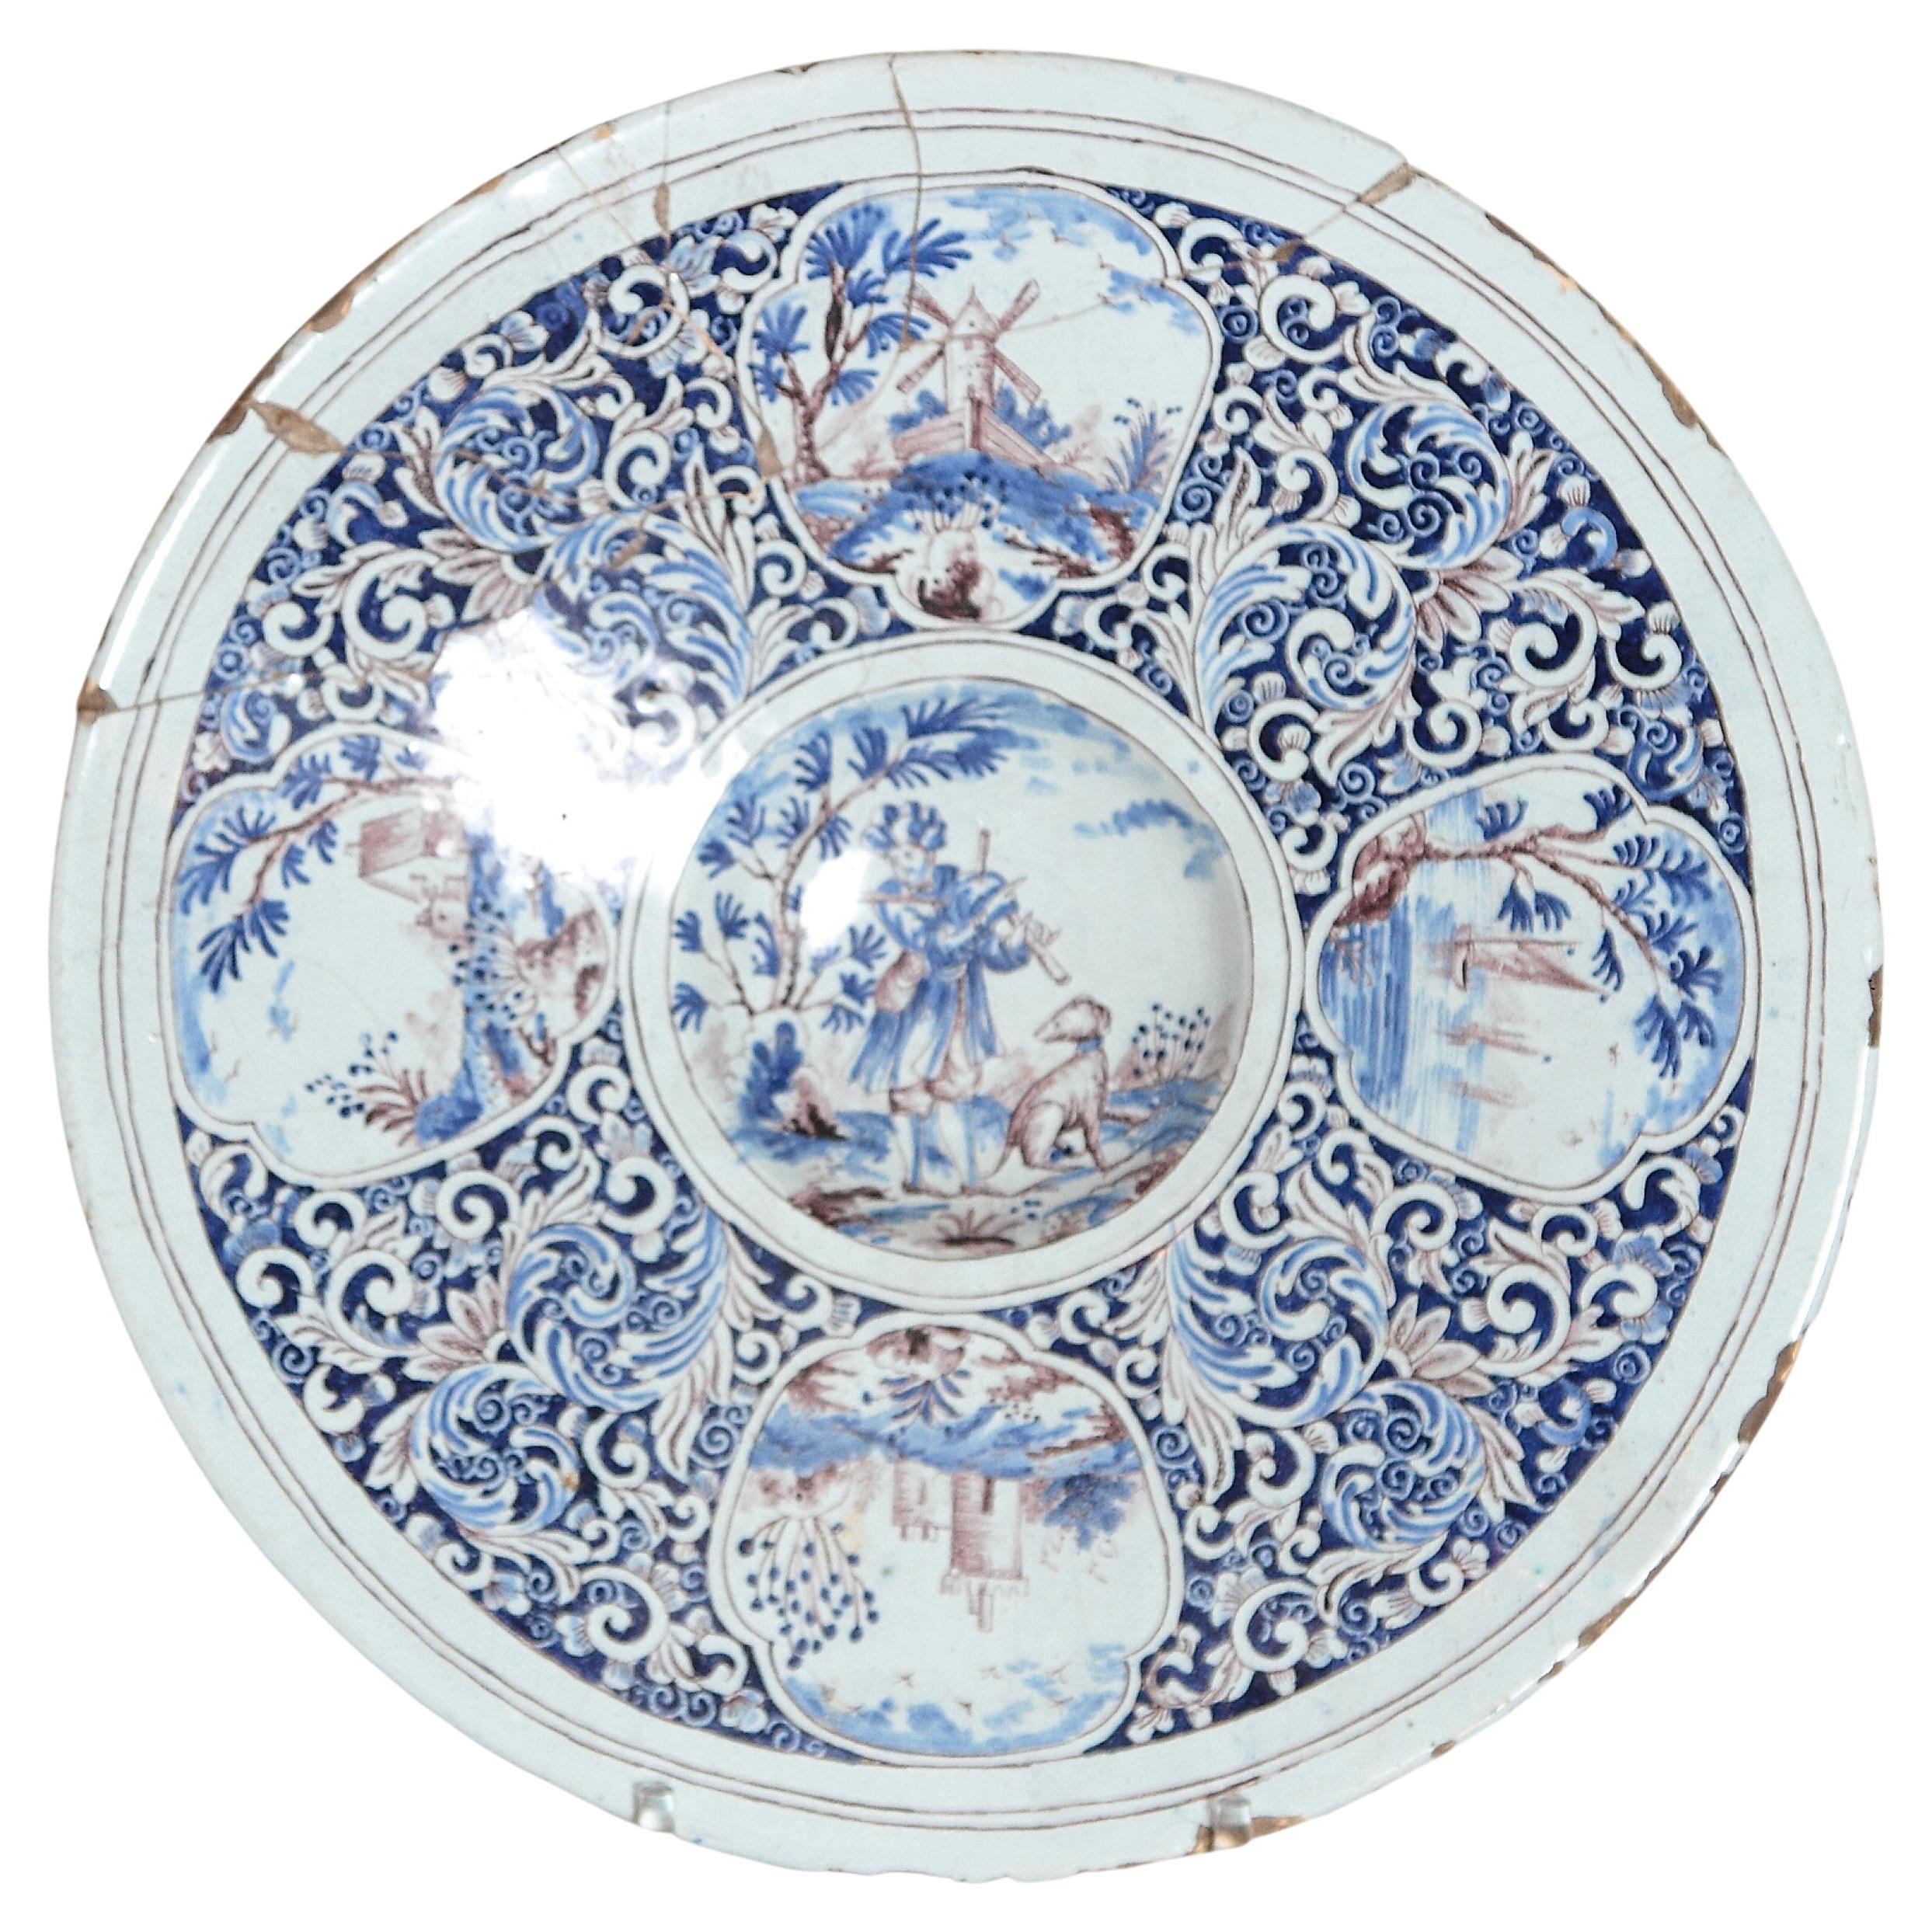 A Large 18th Century Delft Faience Charger with Floral Cartouches For Sale